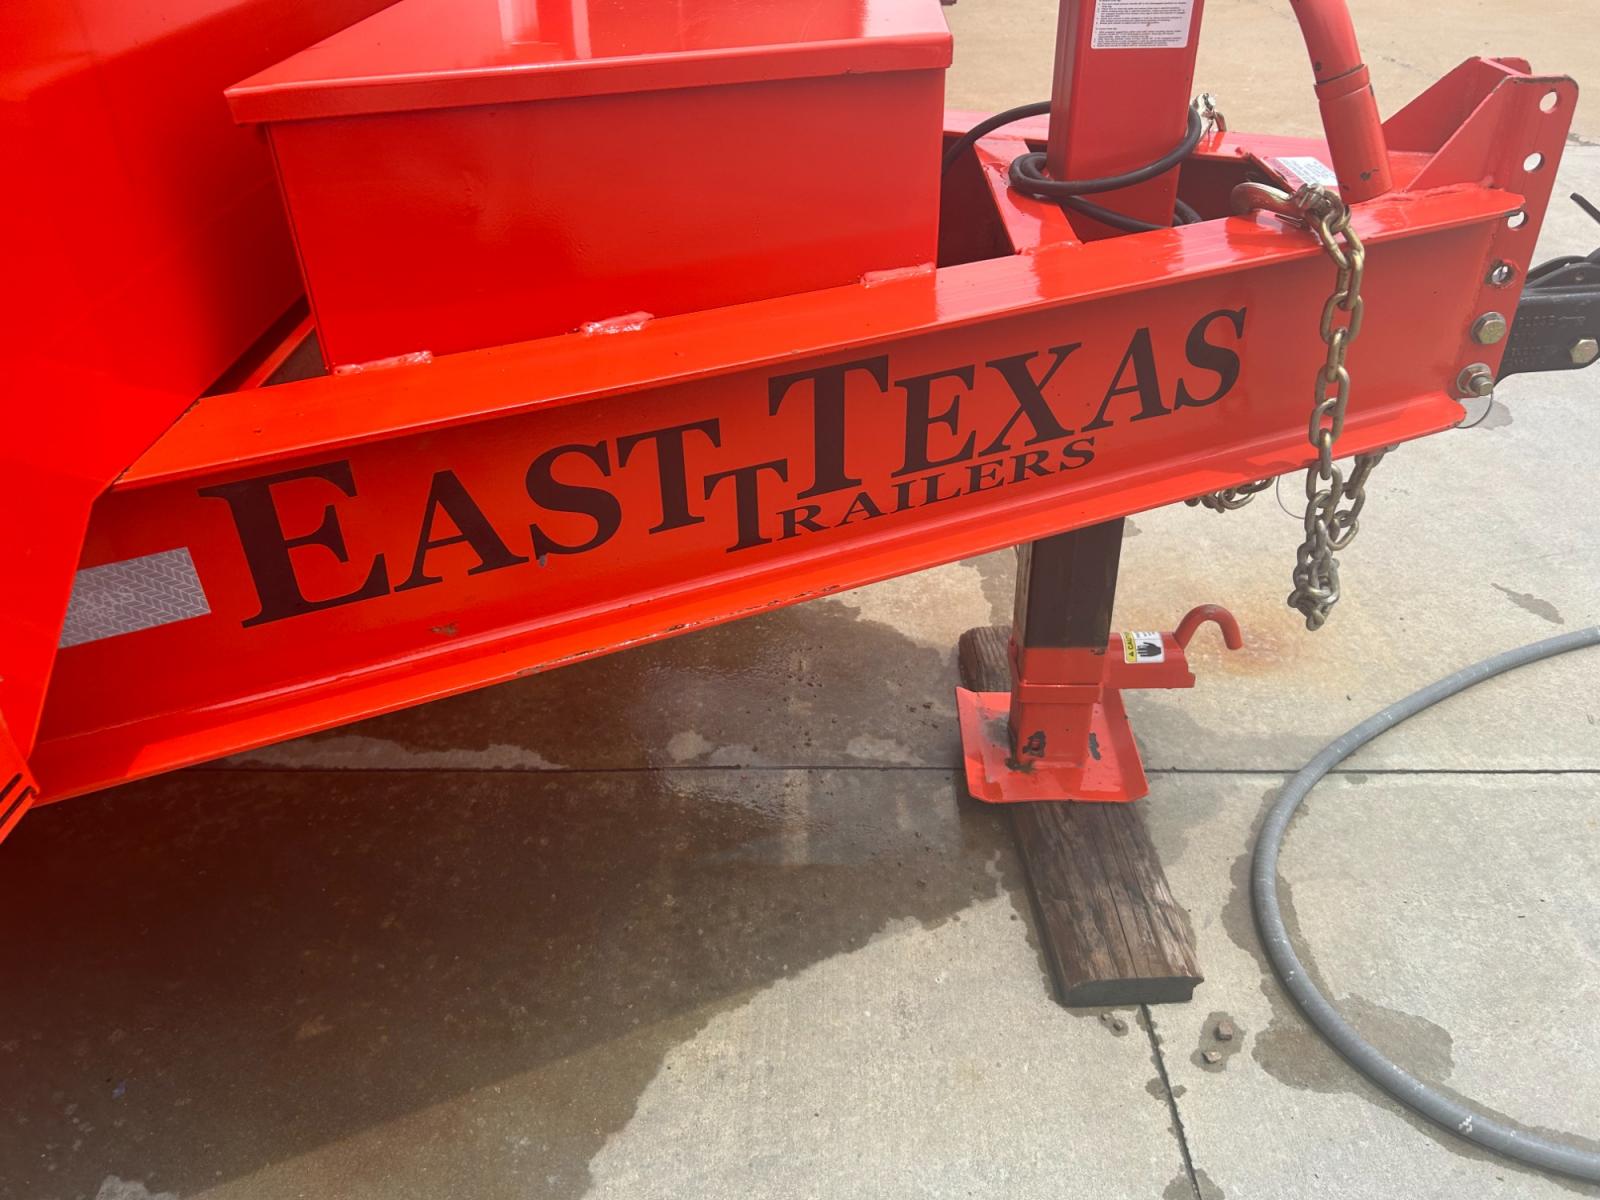 2023 ORANGE EAST TEXAS TRAILER DUMPBED (58SBD1627PE) , located at 17760 Hwy 62, Morris, OK, 74445, 35.609104, -95.877060 - 2023 EAST TEXAS DUMP BED TRAILER IS 16X83, 14,000 GVWR, 2-7000 LB DEXTER ELECTRIC BREAK SYSTEM, TONGUE MOUNTED TOOL BOX, 7 GA FLOOR, 80" SLIDE IN RAMPS, 7 WAY PLUG, LED LIGHTS, 24" HIGH 10 GA. SIDES, 6" 12 LB I-BEAM FRAME, 6" 12 LB I-BEAM TONGUE. TITLE IN HAND. TRAILER IS BASICALLY NEW AND HAS ONLY - Photo #13